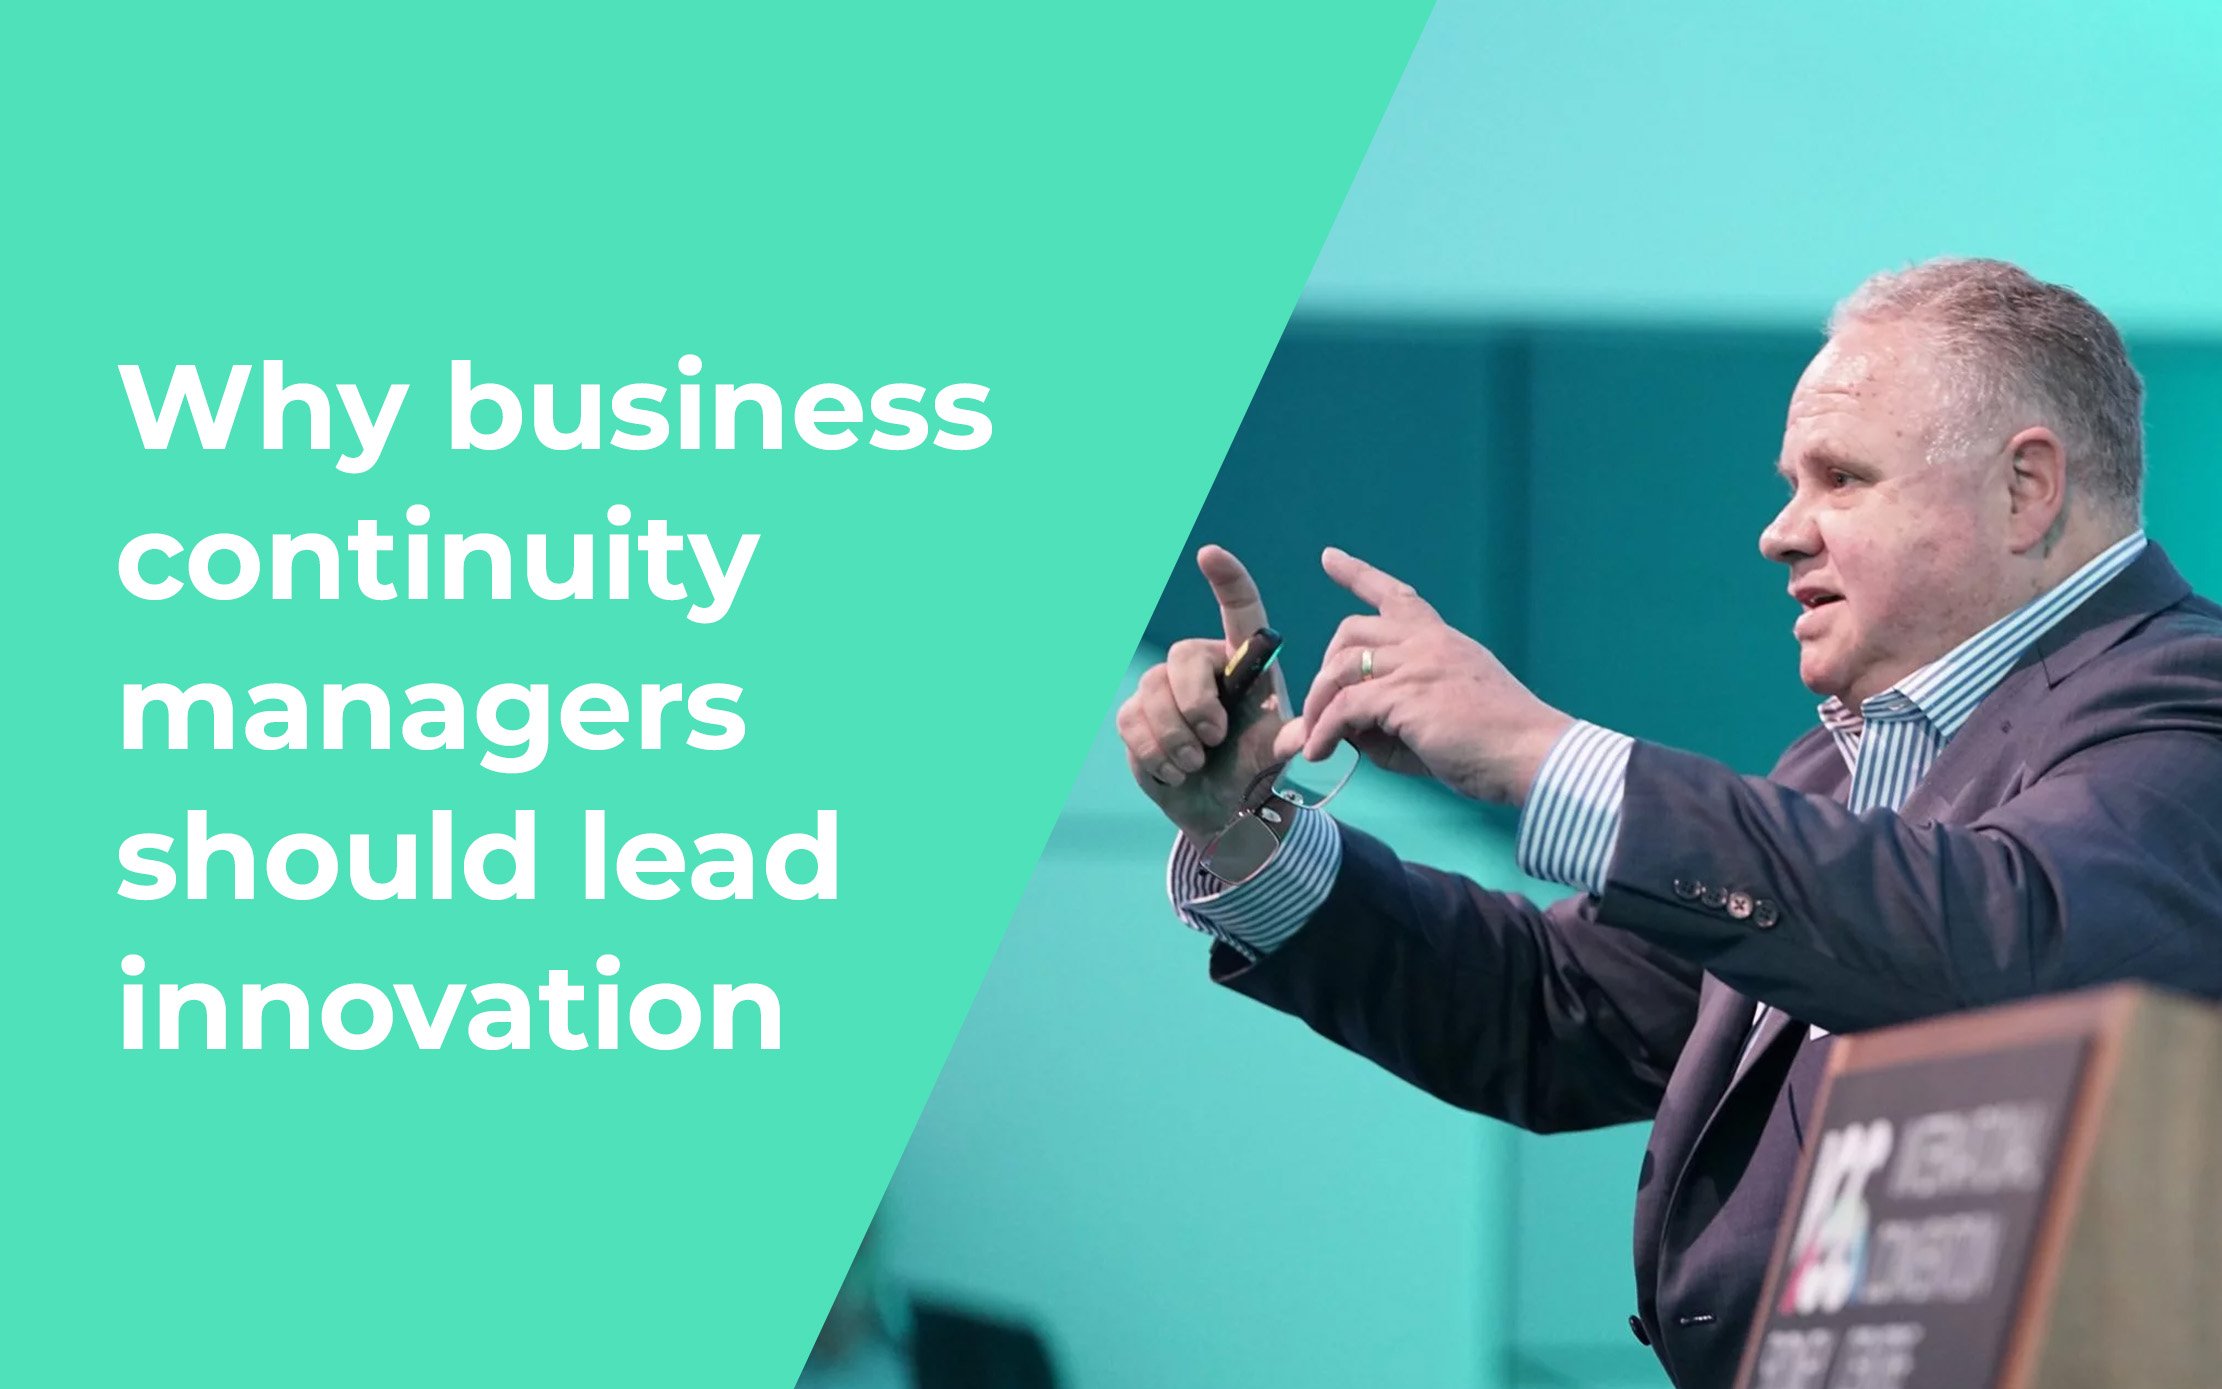 Why business continuity managers should lead innovation